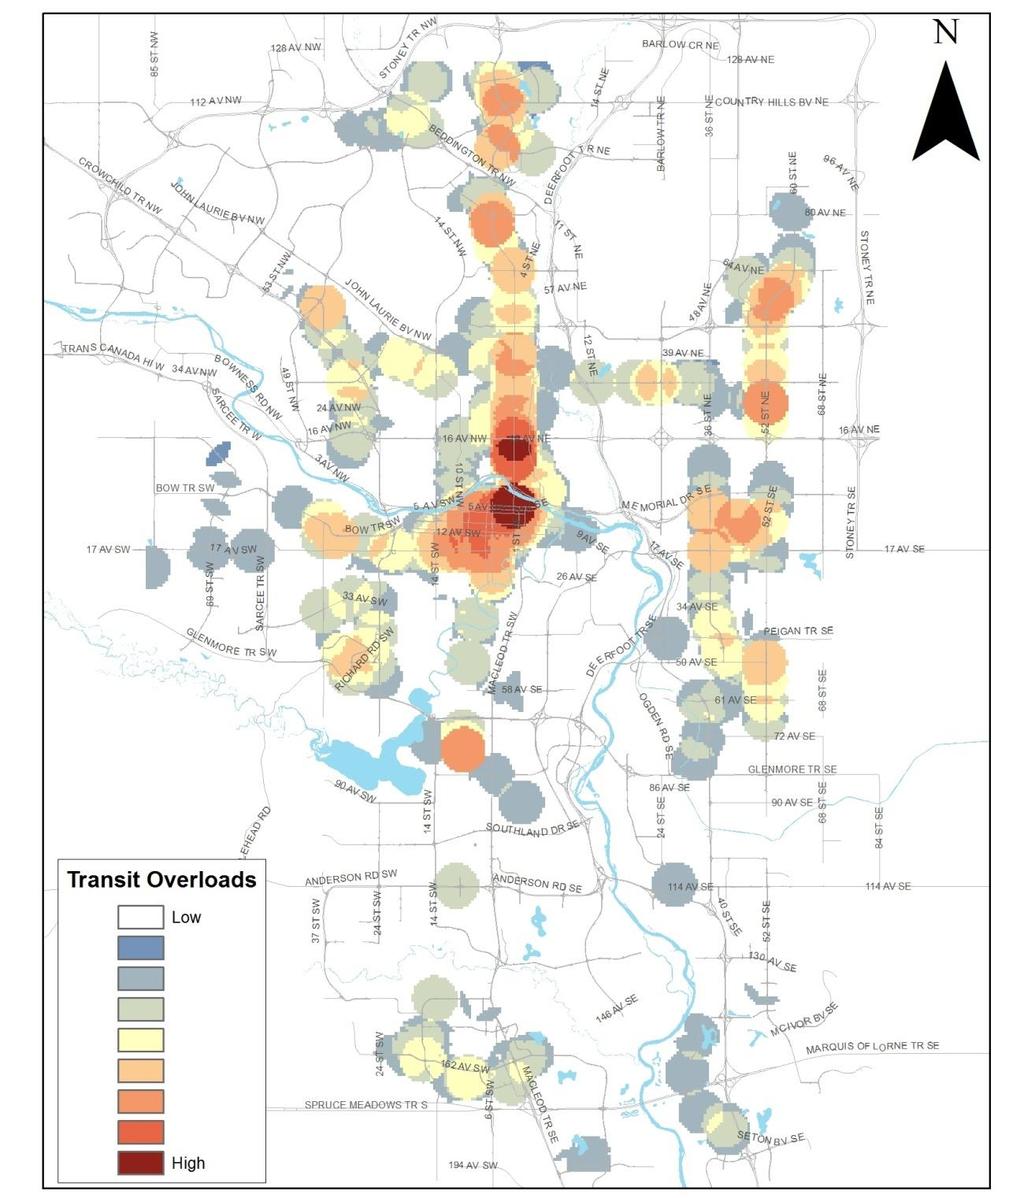 2012-2014 Bus Overload Hot Spots 55 Basis for Business Case 35,000 average weekday in North: passengers on buses on improving Centre Street north of downtown in